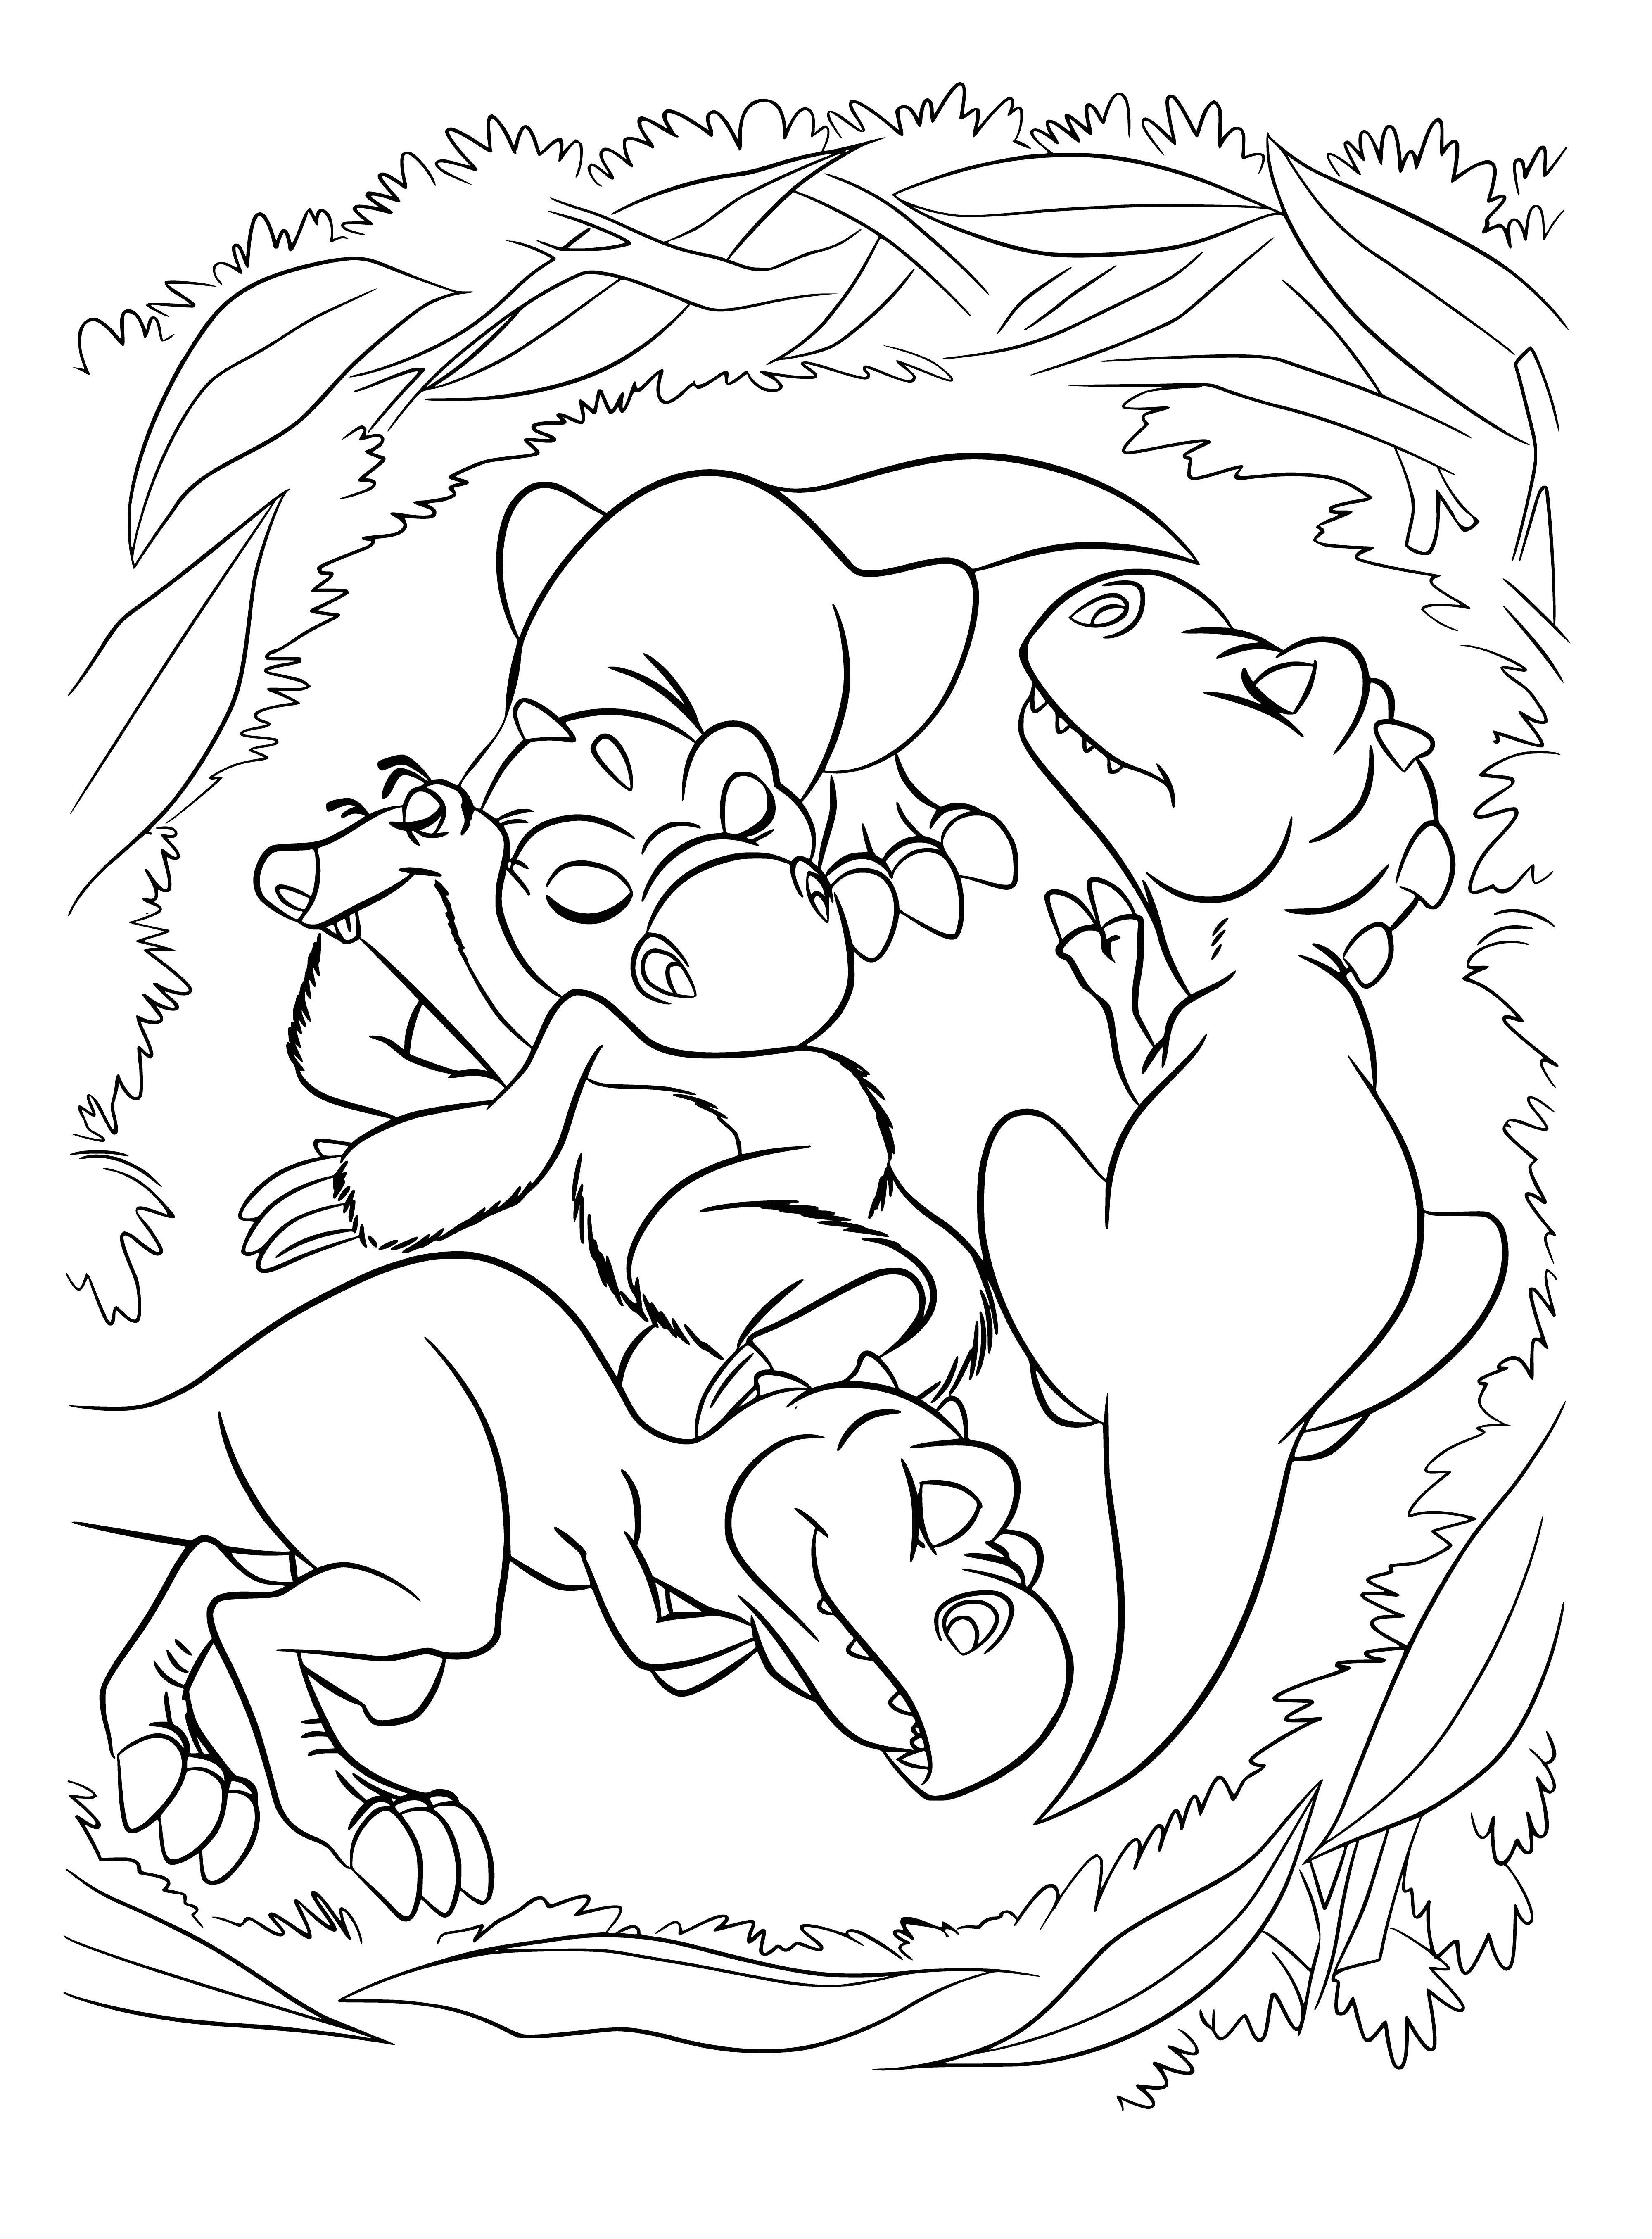 Lovely picture coloring page